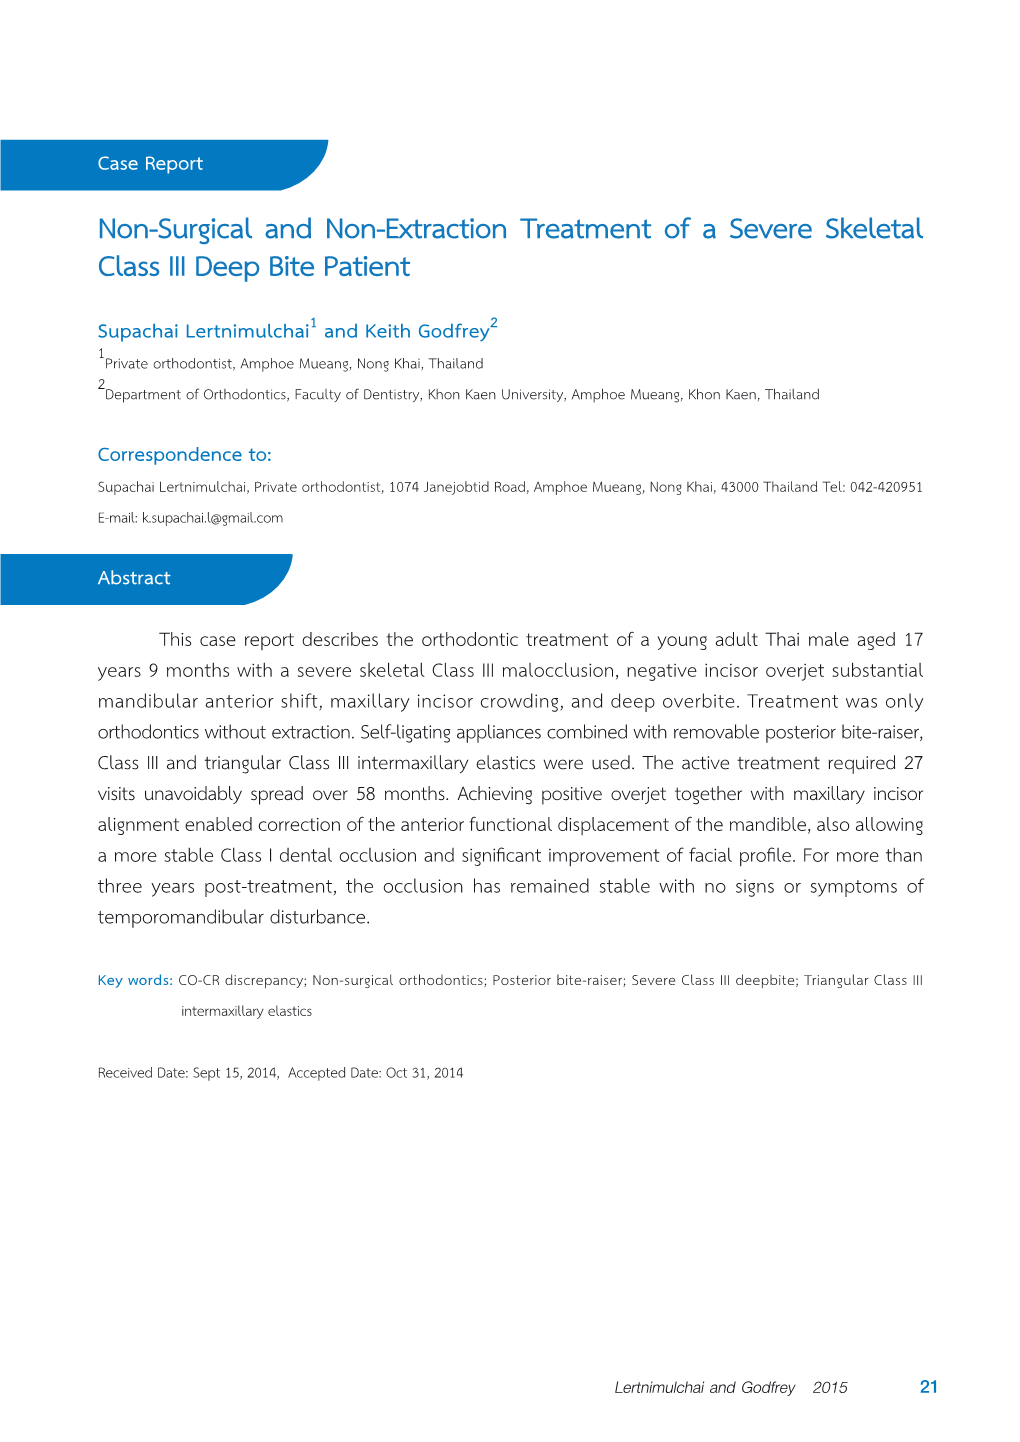 Non-Surgical and Non-Extraction Treatment of a Severe Skeletal Class III Deep Bite Patient